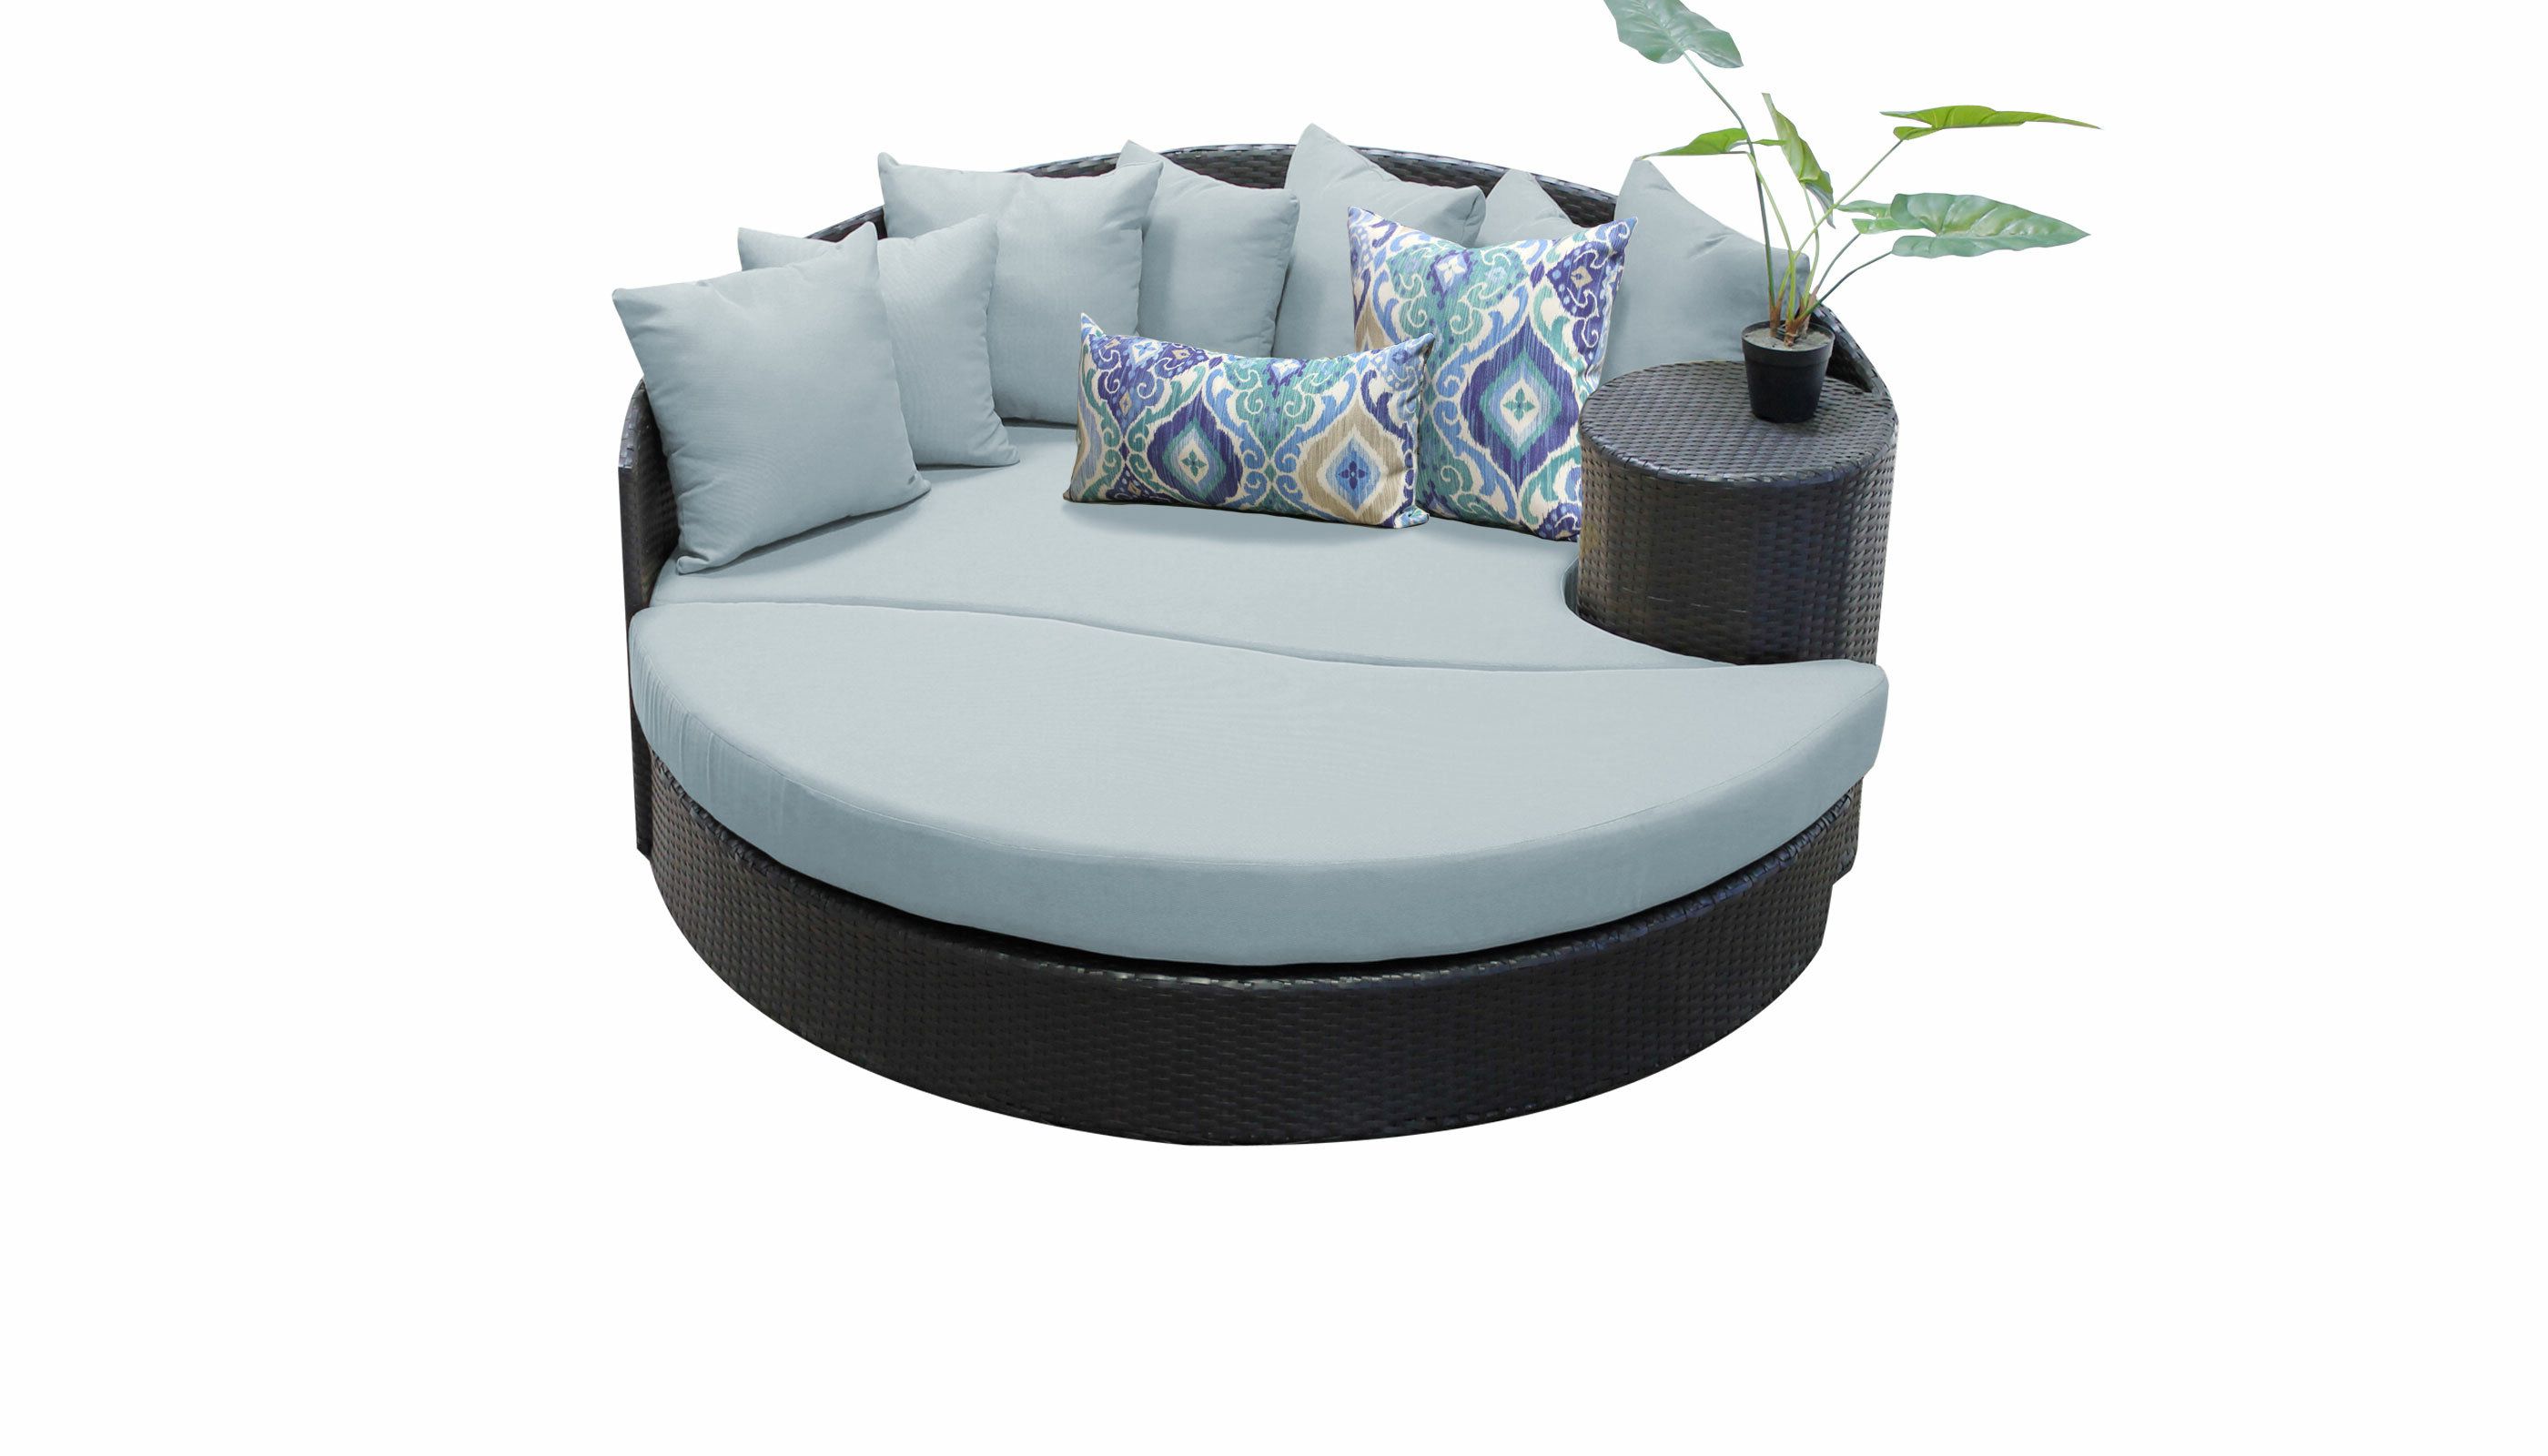 Preferred Brennon Cube Patio Daybeds With Cushions Throughout Camak Patio Daybed With Cushion (View 12 of 25)